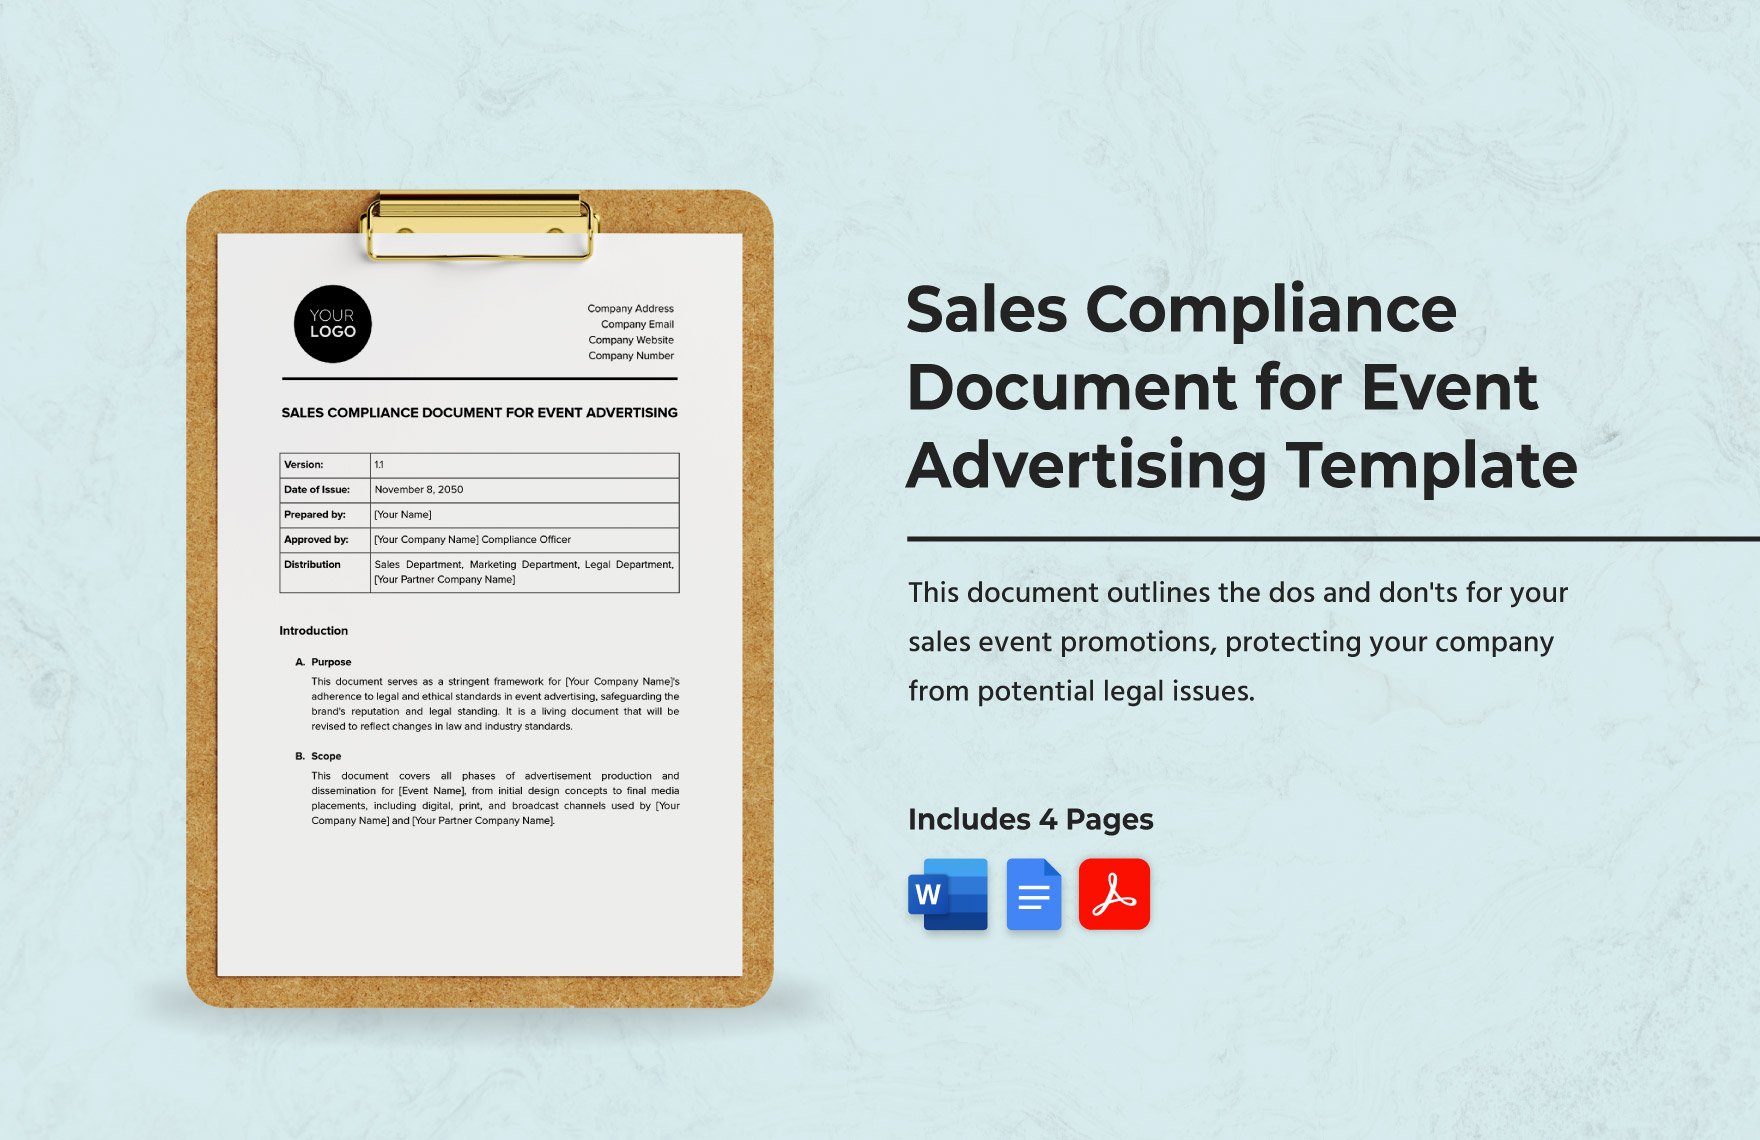 Sales Compliance Document for Event Advertising Template